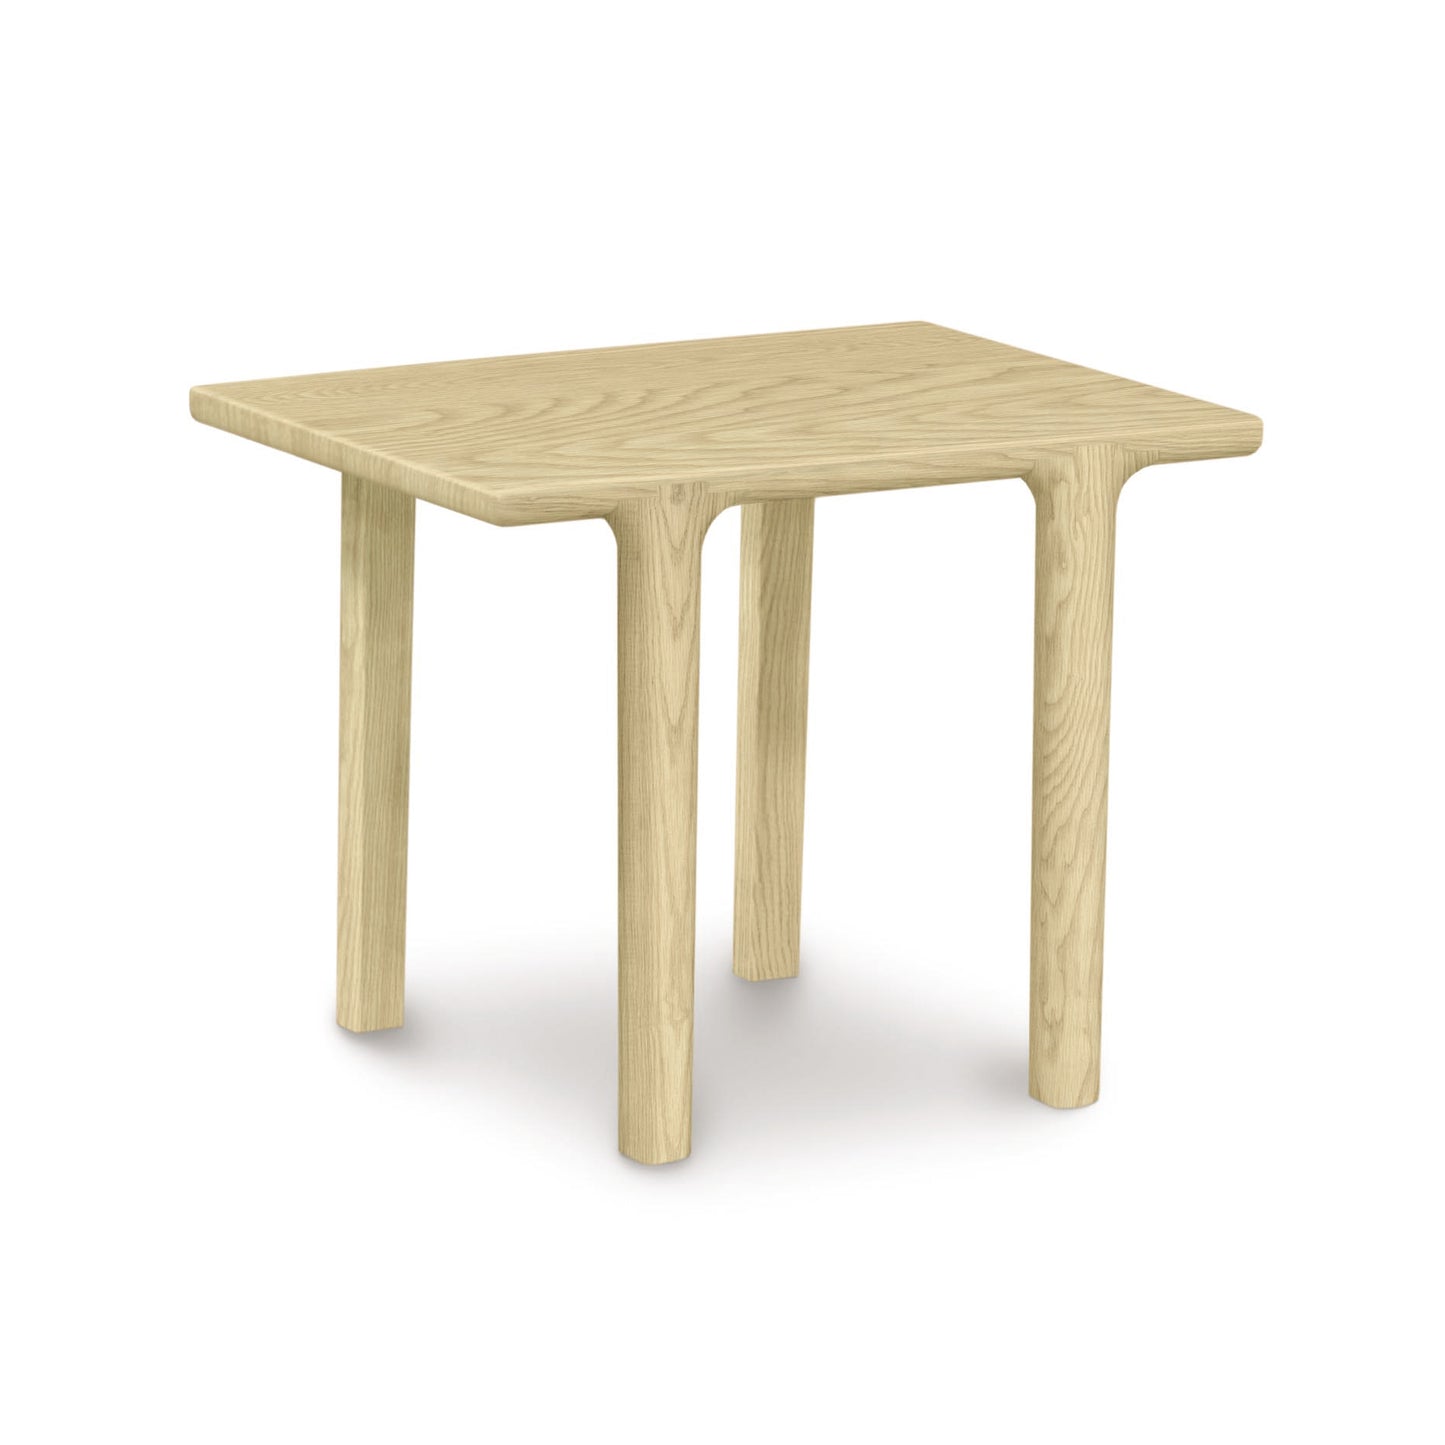 The Copeland Furniture Sierra Rectangular End Table combines a modern personality with a wooden base, making it the perfect addition to any Sierra seating collection.